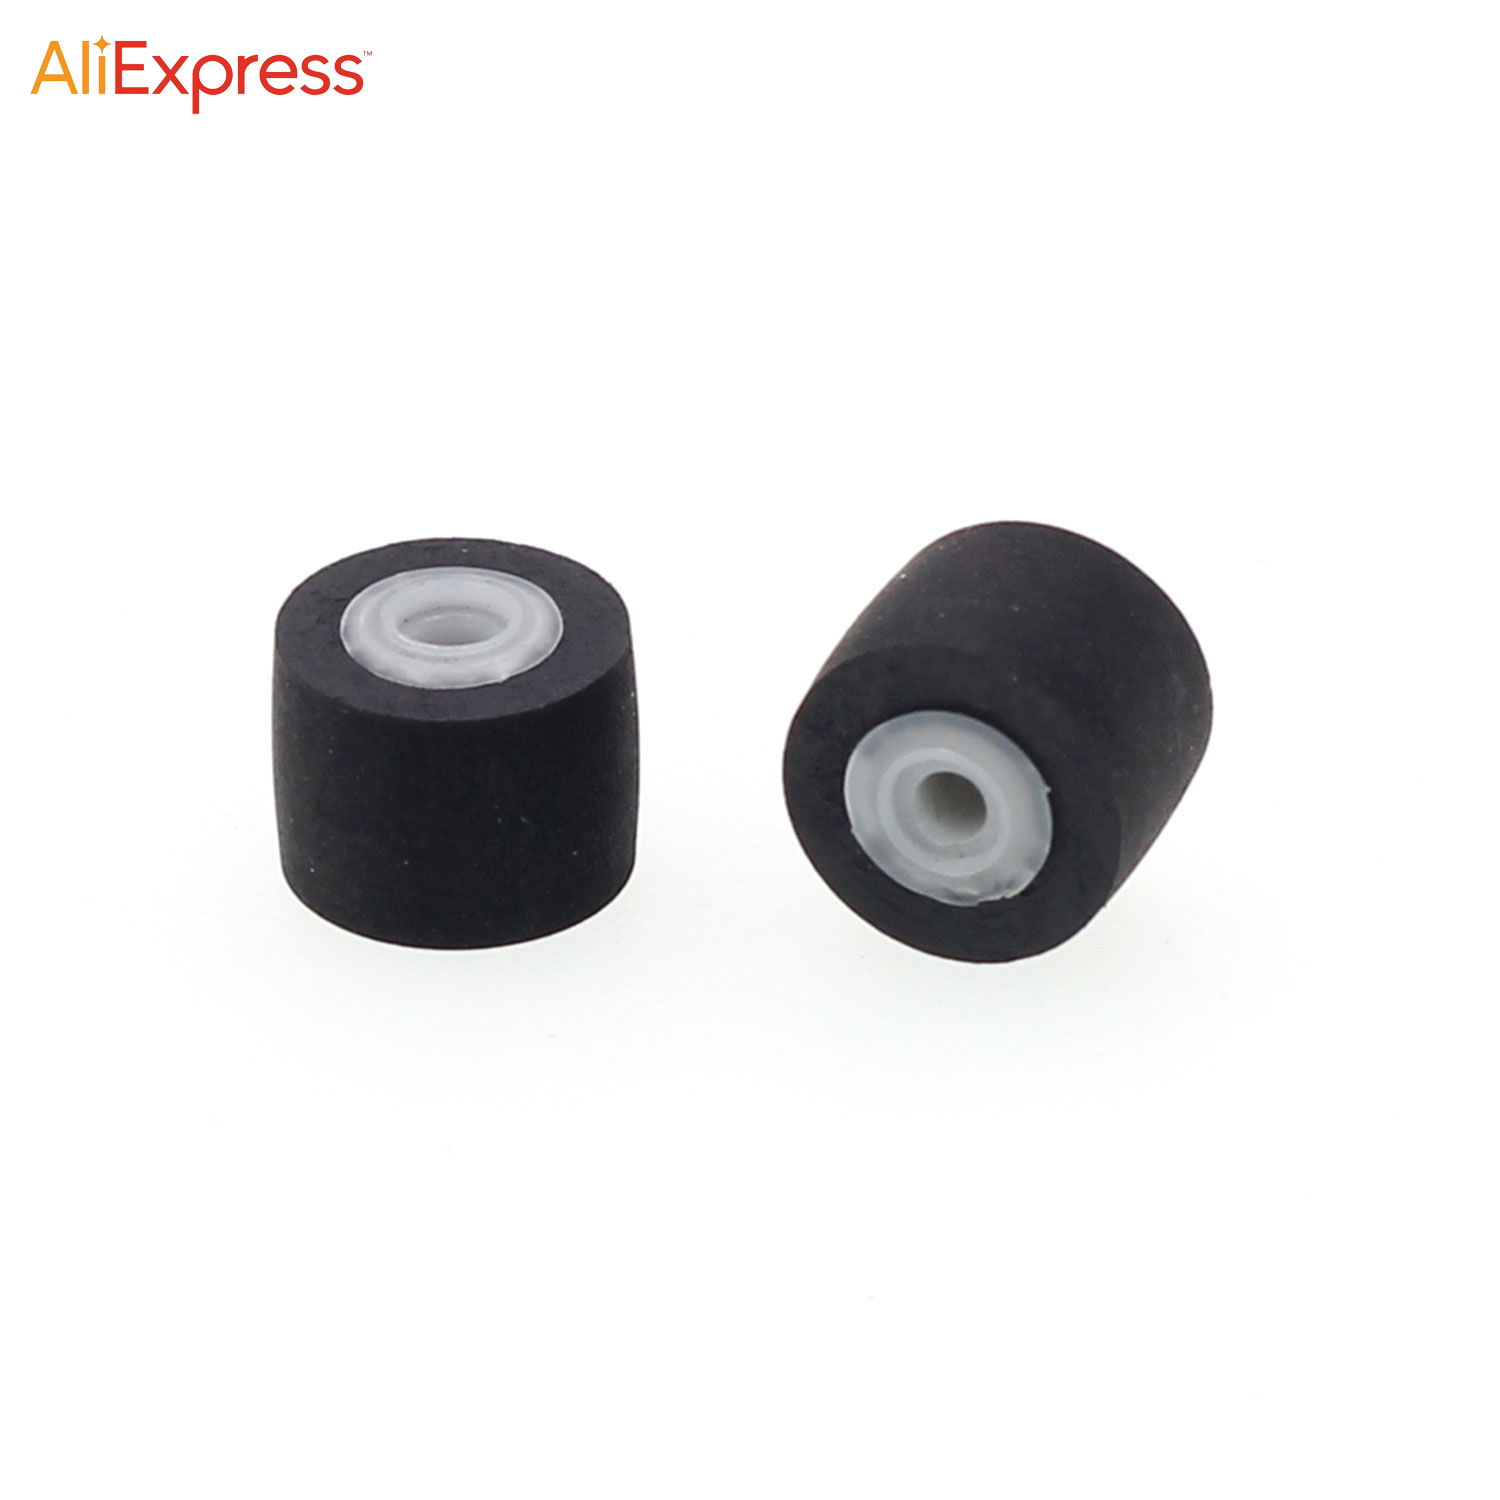 10mmx8x2 rubber box mobile pressing roller